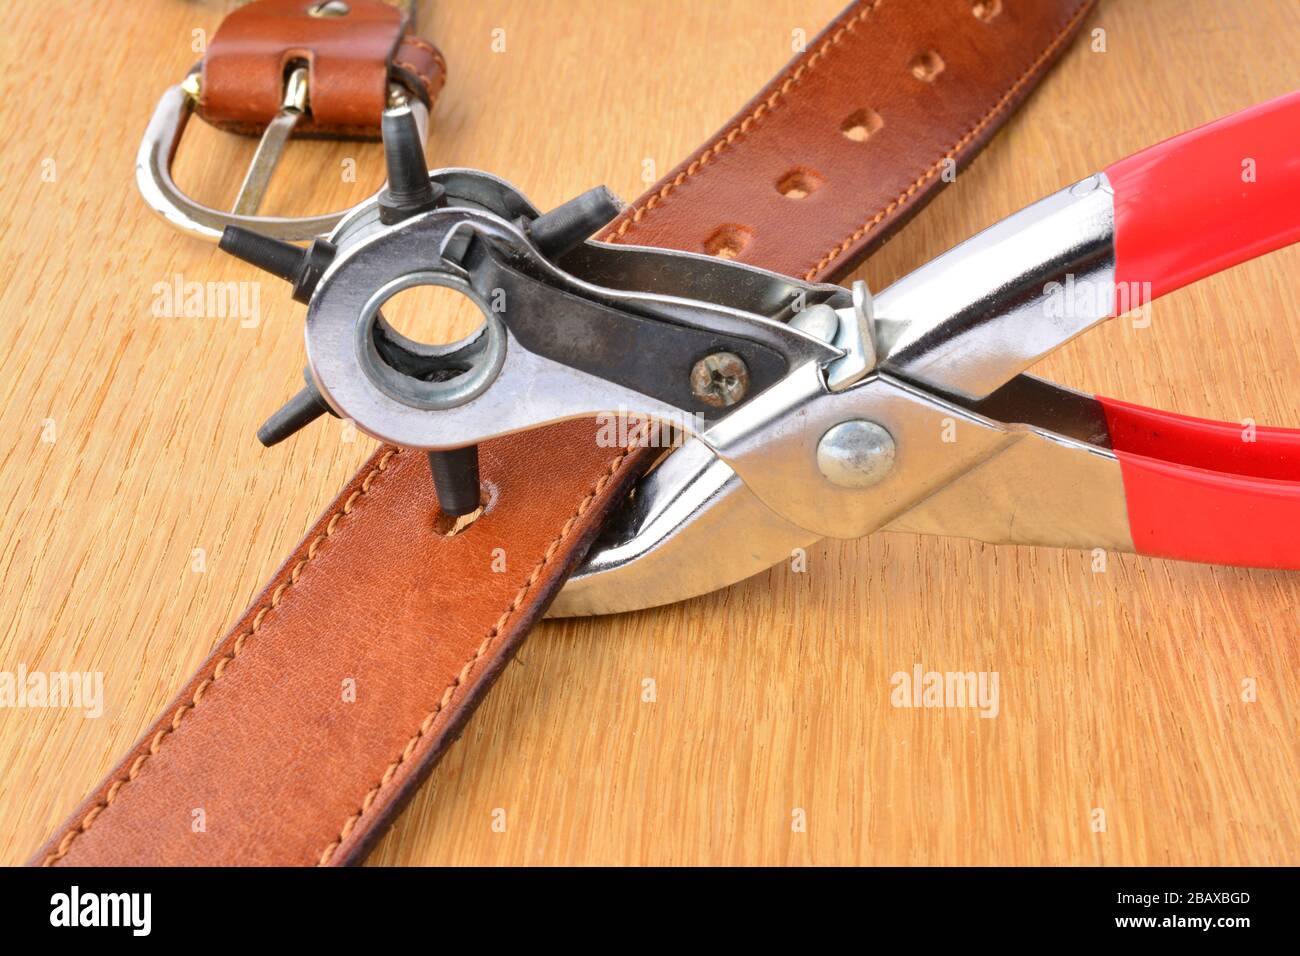 Leather punch tool and leather belth on wooden background in working position Stock Photo